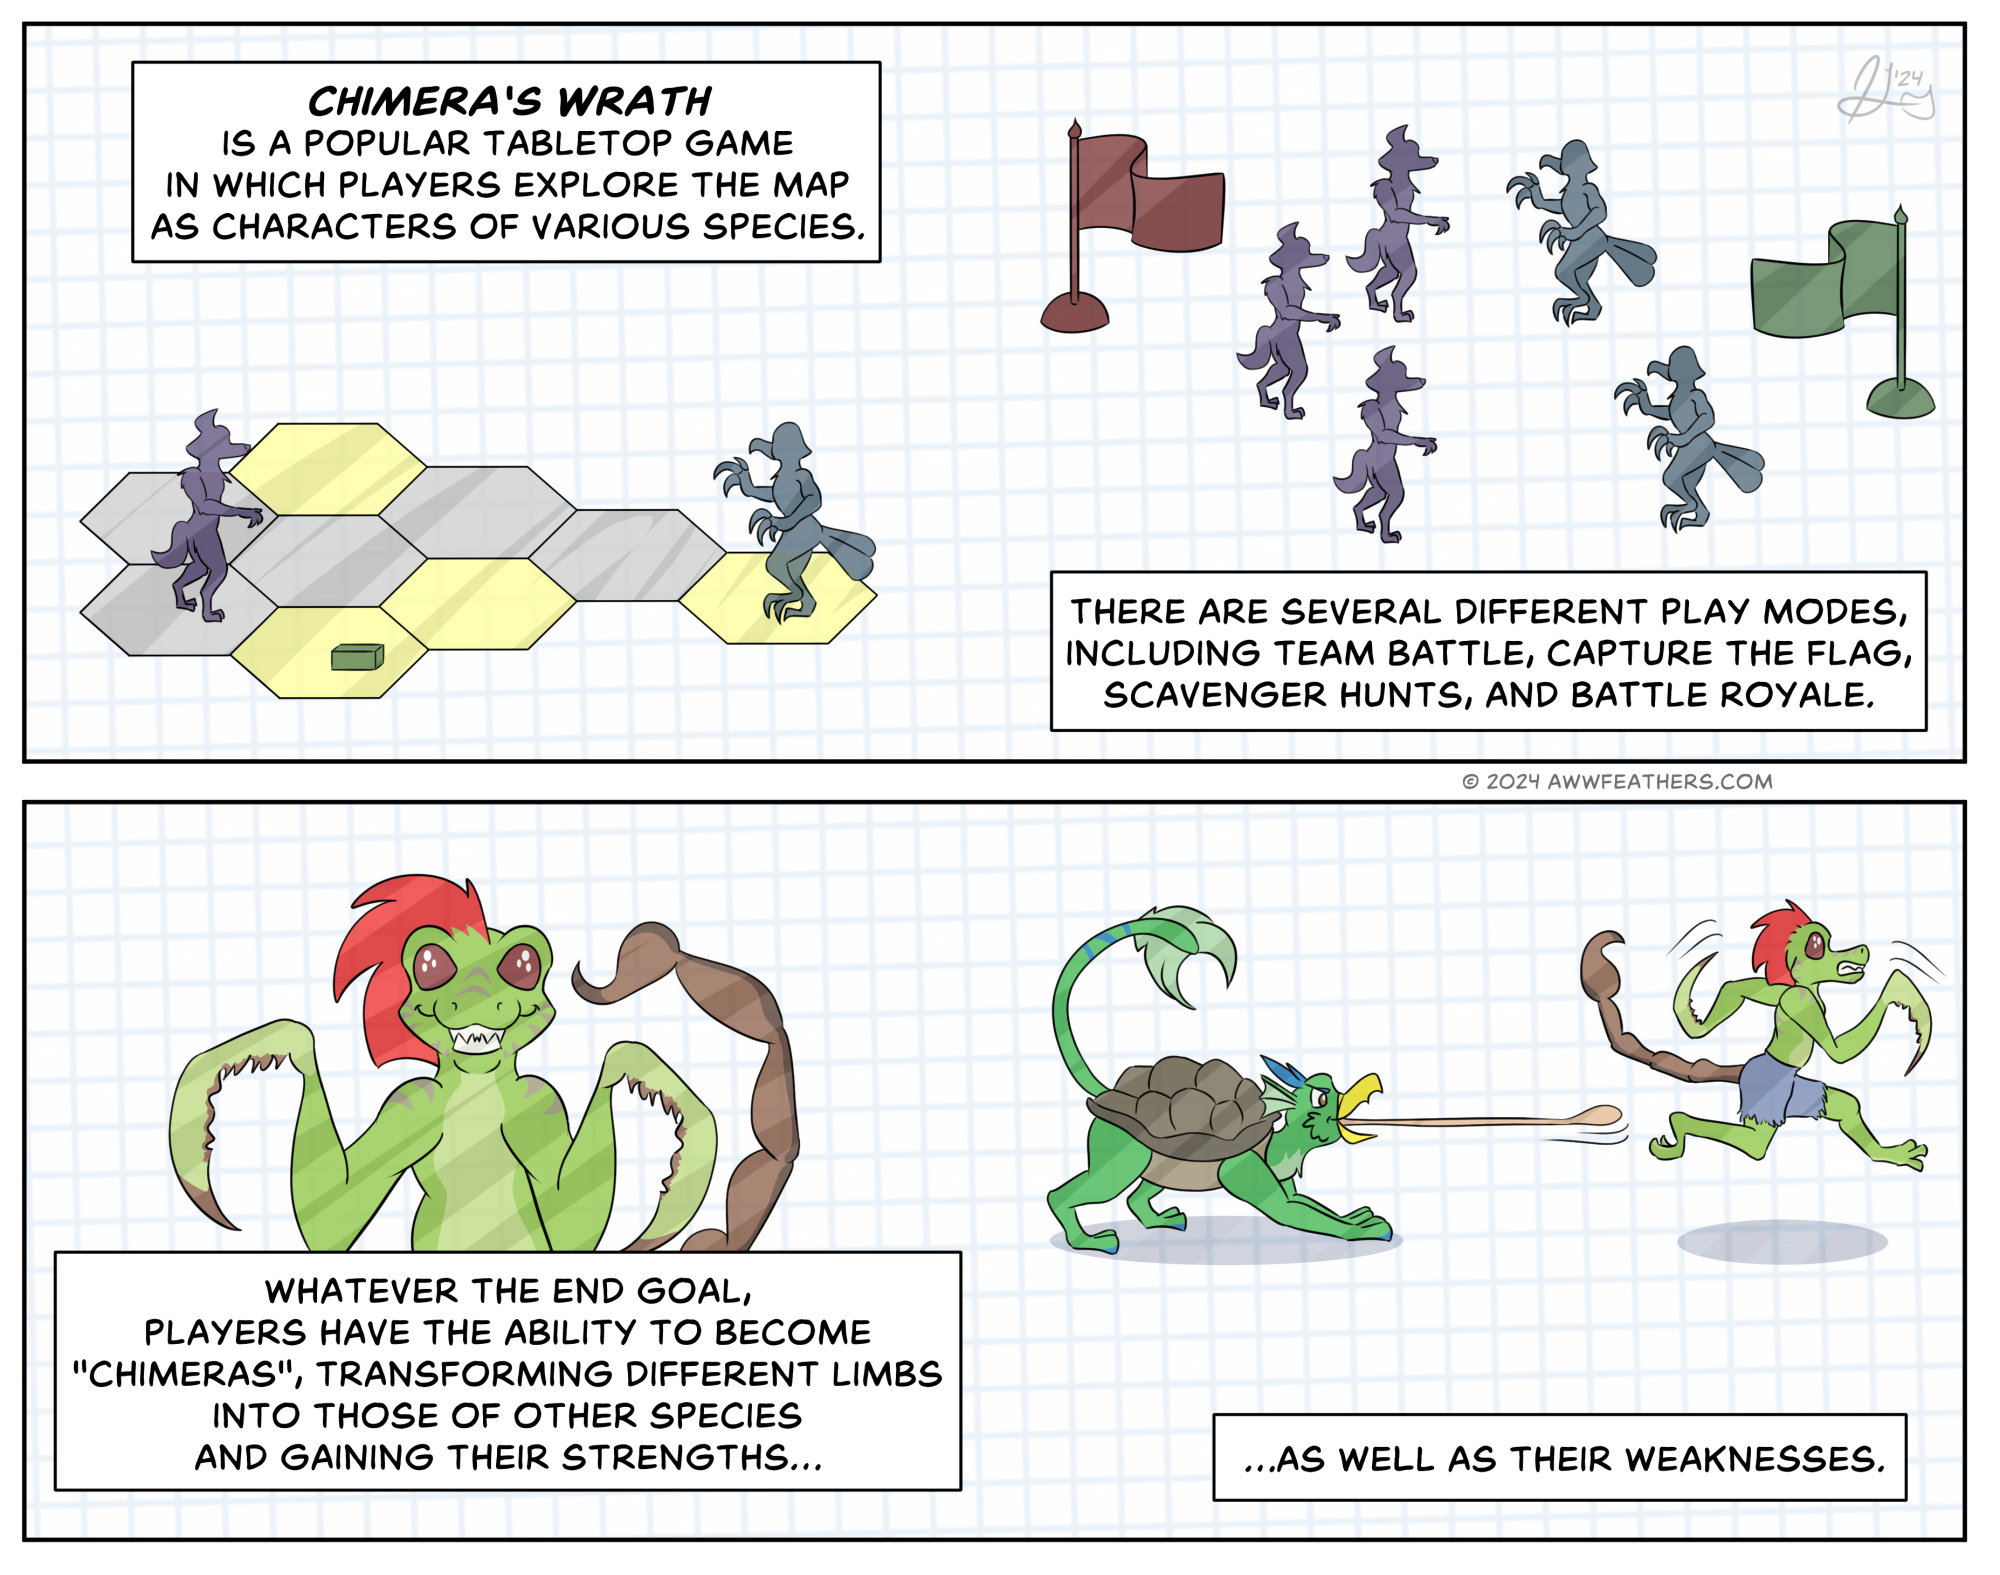 A caption reads, "Chimera's Wrath is a popular tabletop game in which players explore the map as characters of various species." We see a hexoganal game board with two figurines at opposite ends of the board, one resembling a canine, and the other a bird. The caption continues, "There are several different play modes, including team battle, capture the flag, scavenger hunts, and battle royale." We see two teams of figurines arranged in formations facing off against each other, one with a red flag behind them and the other with a green flag. Then the caption says, "Whatever the end goal, players have the ability to become 'chimeras', transforming different limbs into those of other species adn gaining their strengths..." We see Ine grinning widely, his hands transformed into those of a preying mantis and with large segmented eyes and a scorpion's tail. Then we see mantis-Ine running away from Dilawar, who has a large tortoise shell on his back and is flinging a long tongue out of his mouth towards Ine. The final caption reads, "...as well as their weaknesses."